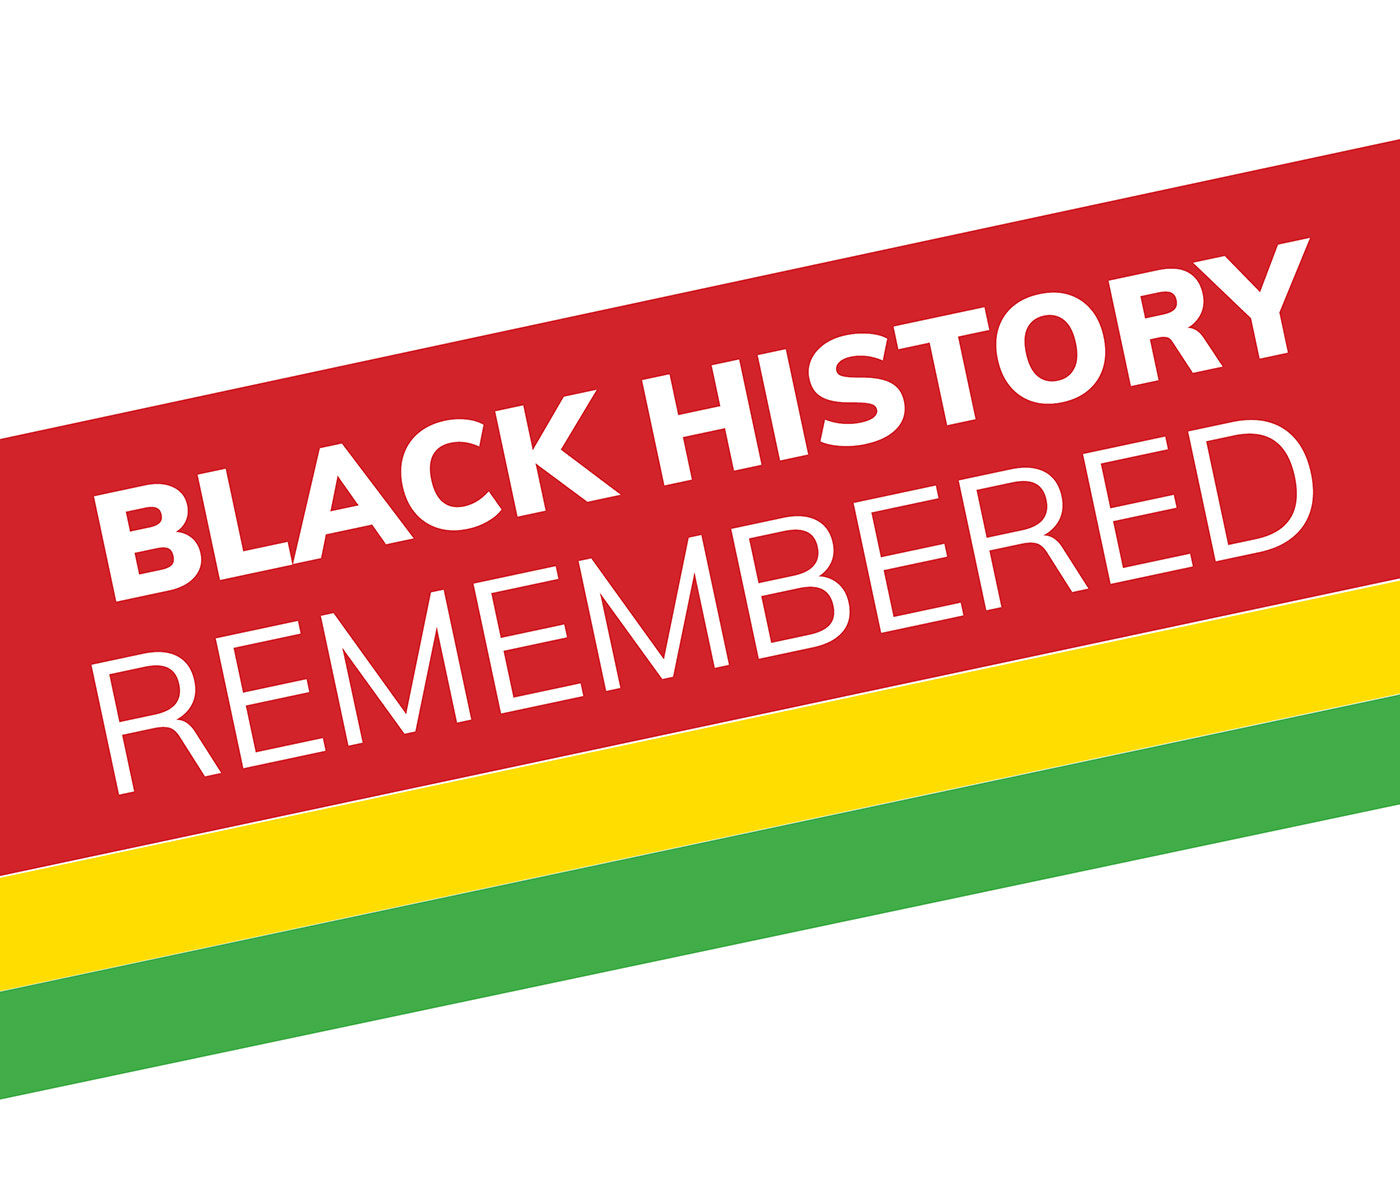 Black History Remembered